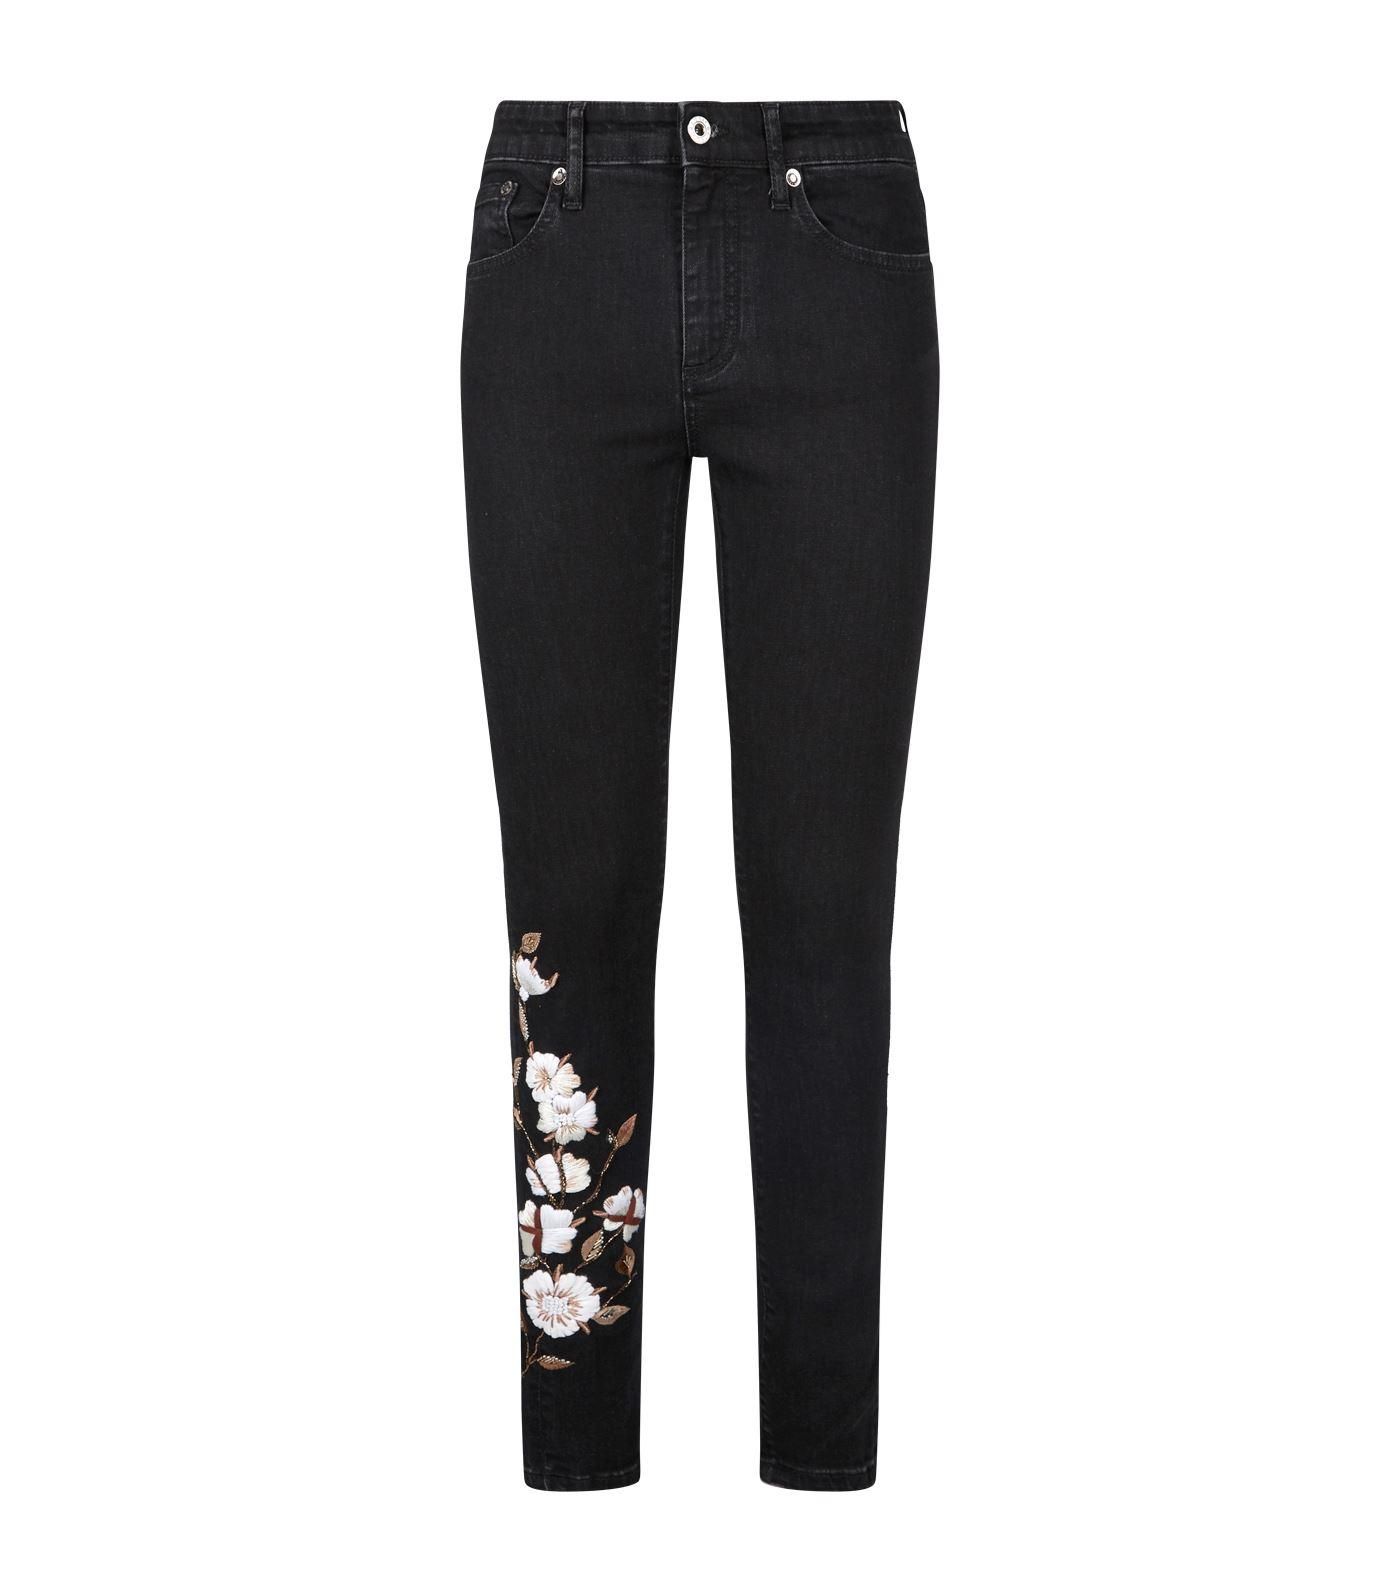 Off-White c/o Virgil Abloh Floral Embroidered Skinny Jeans in Black | Lyst